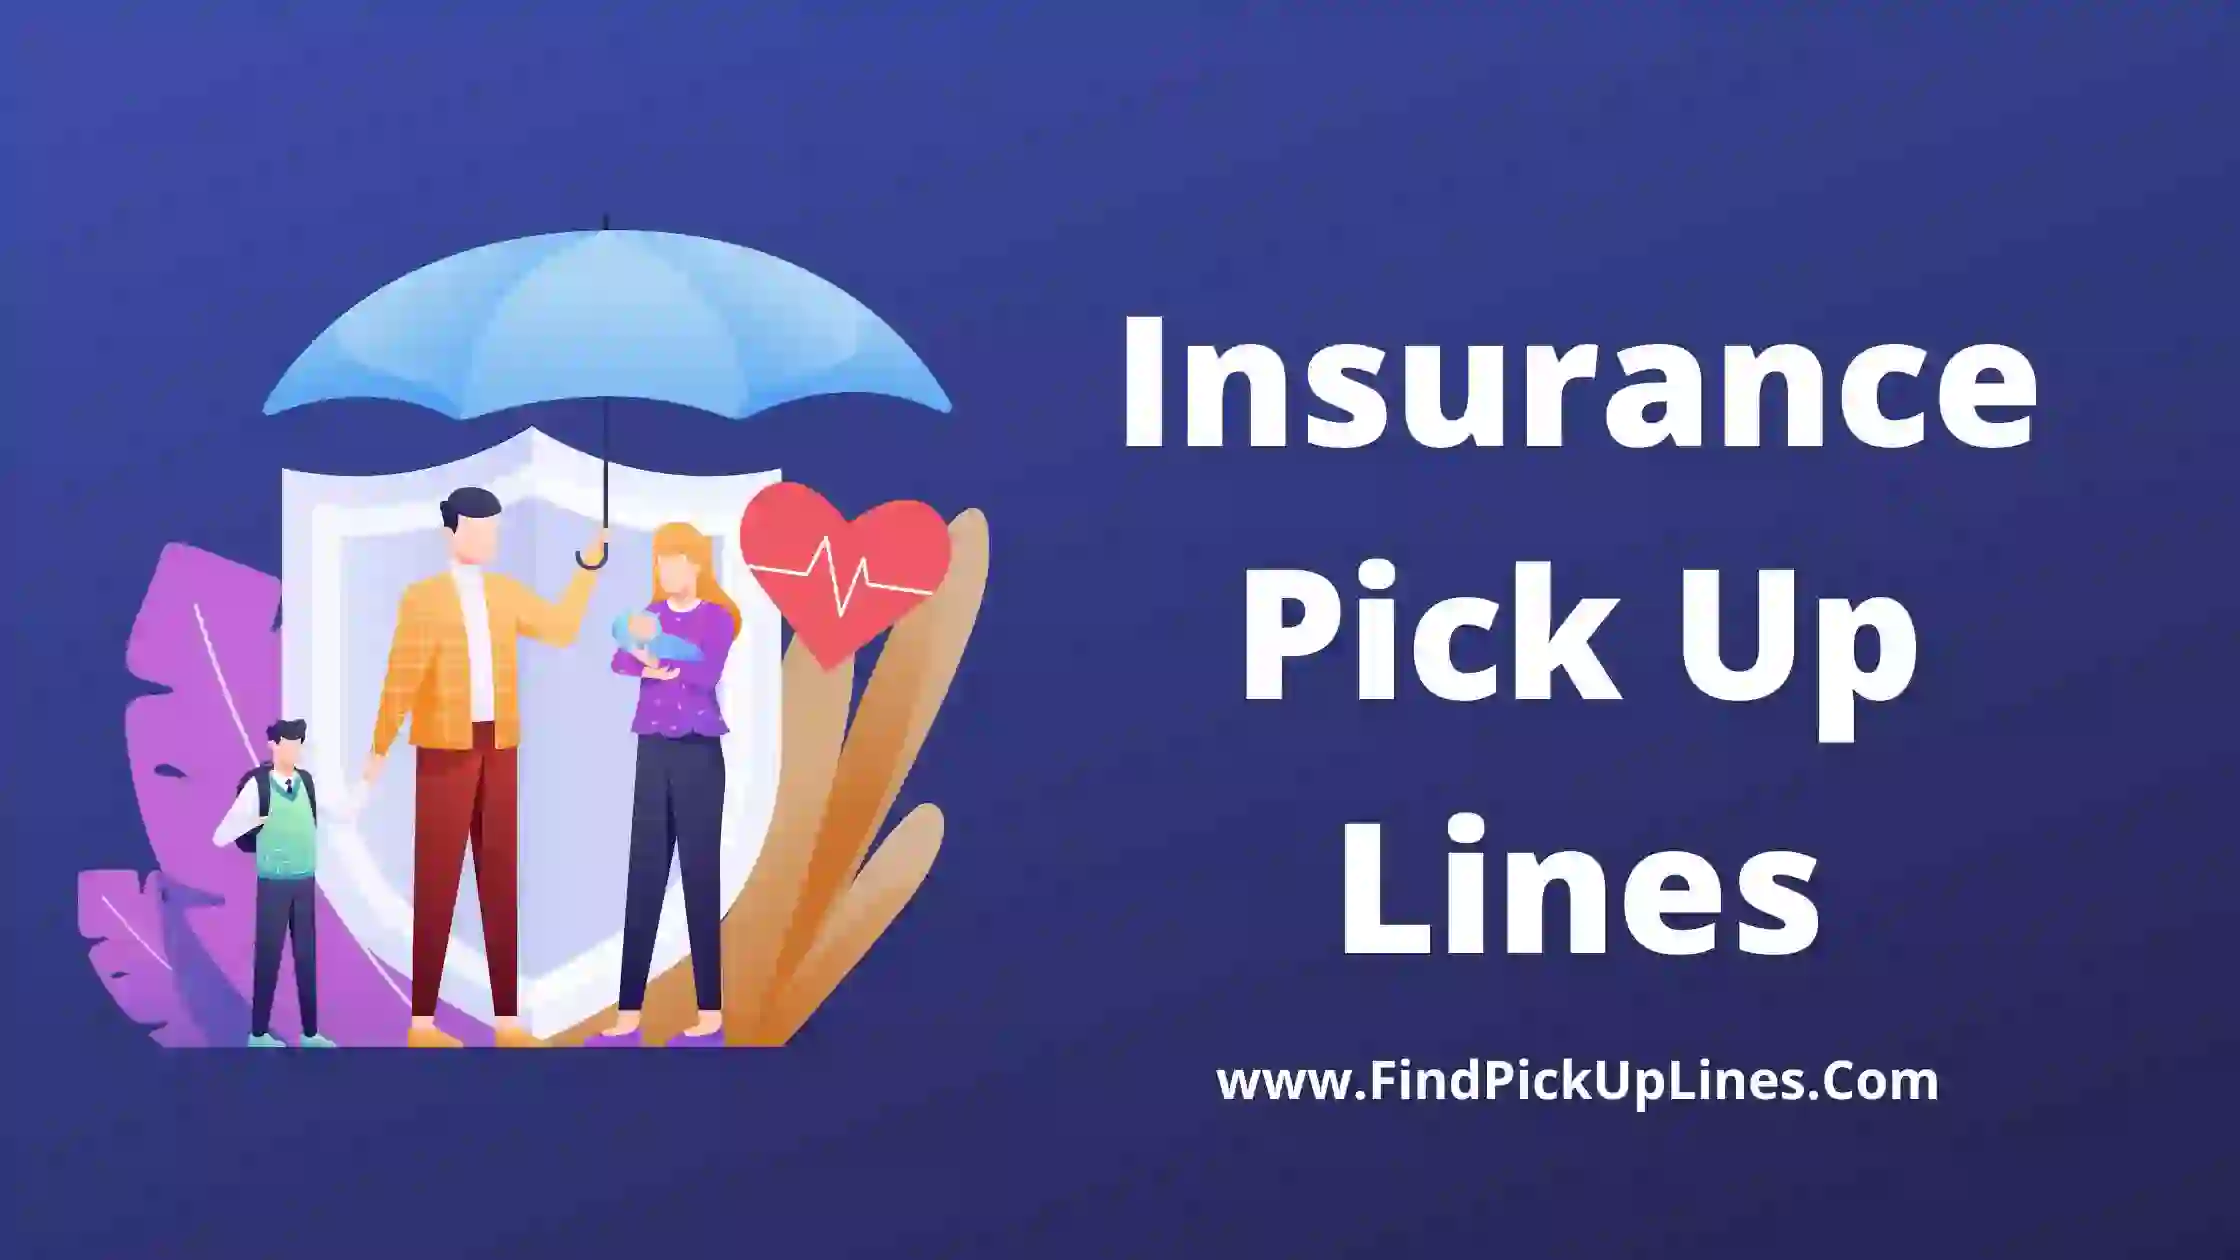 Insurance Pick Up Lines